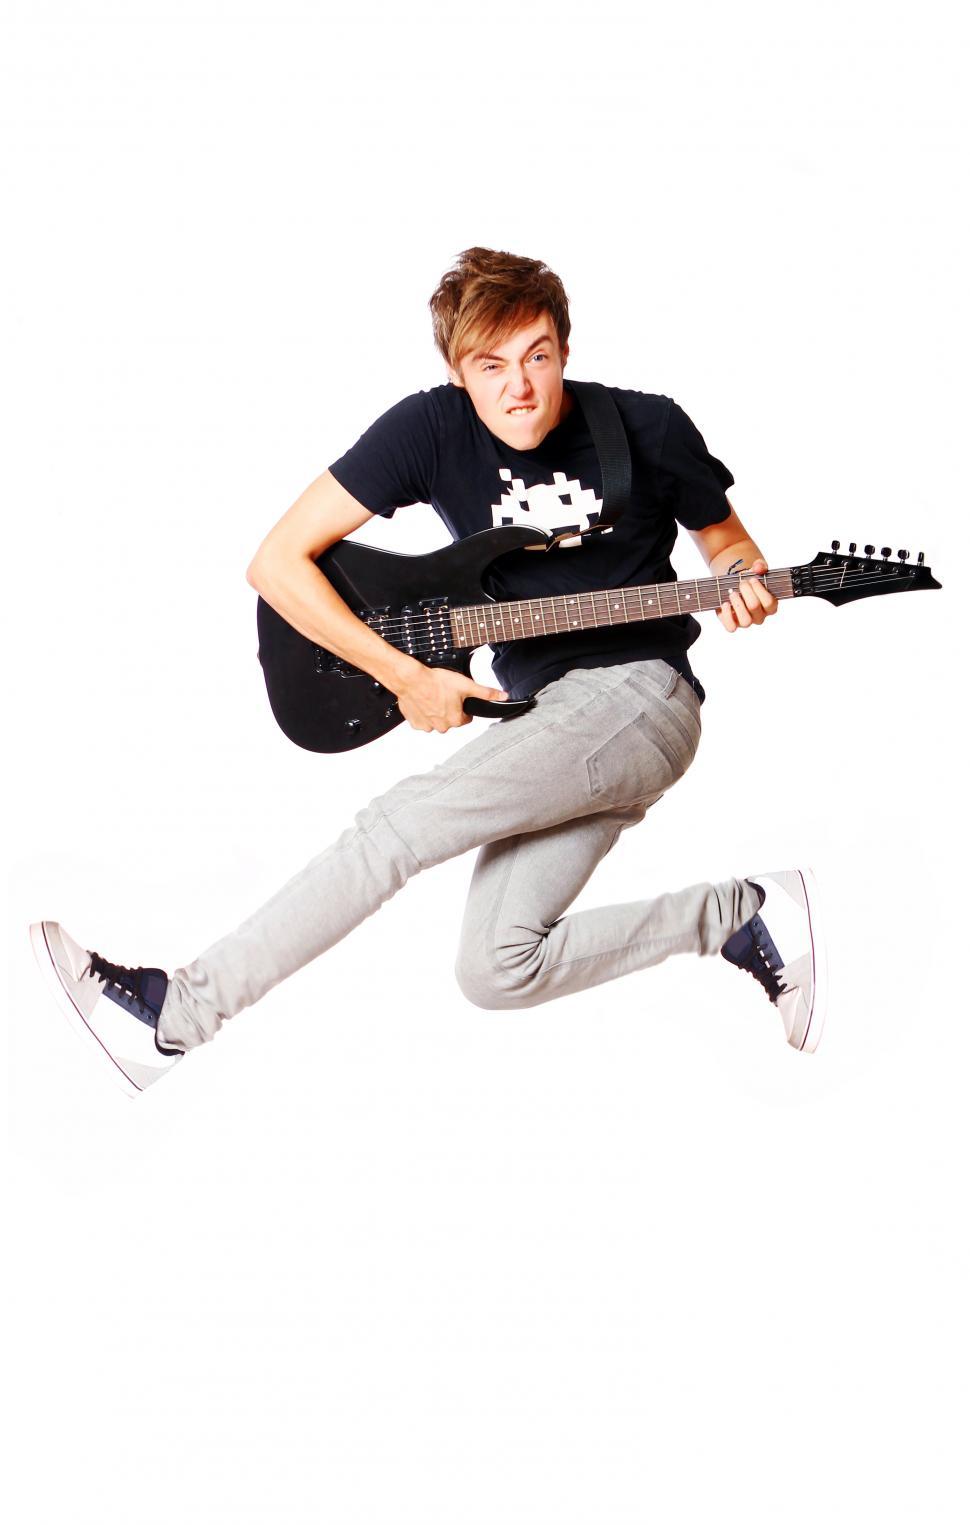 Free Image of Electric guitar player jumping in the air 